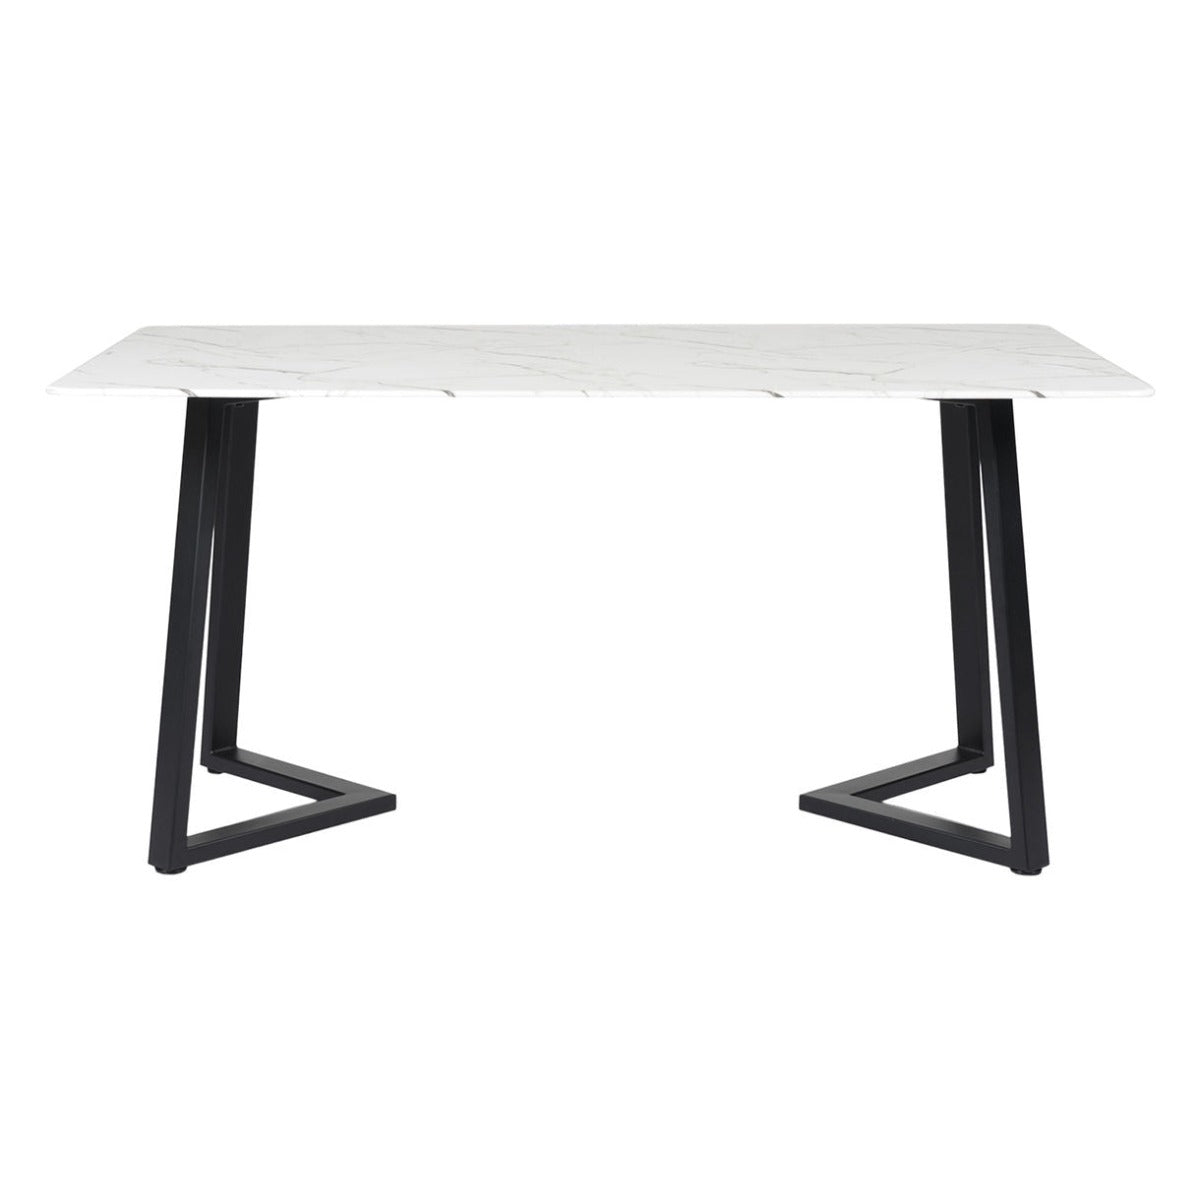 Fugura Marble 6 Seater Dining Table In Black Finish